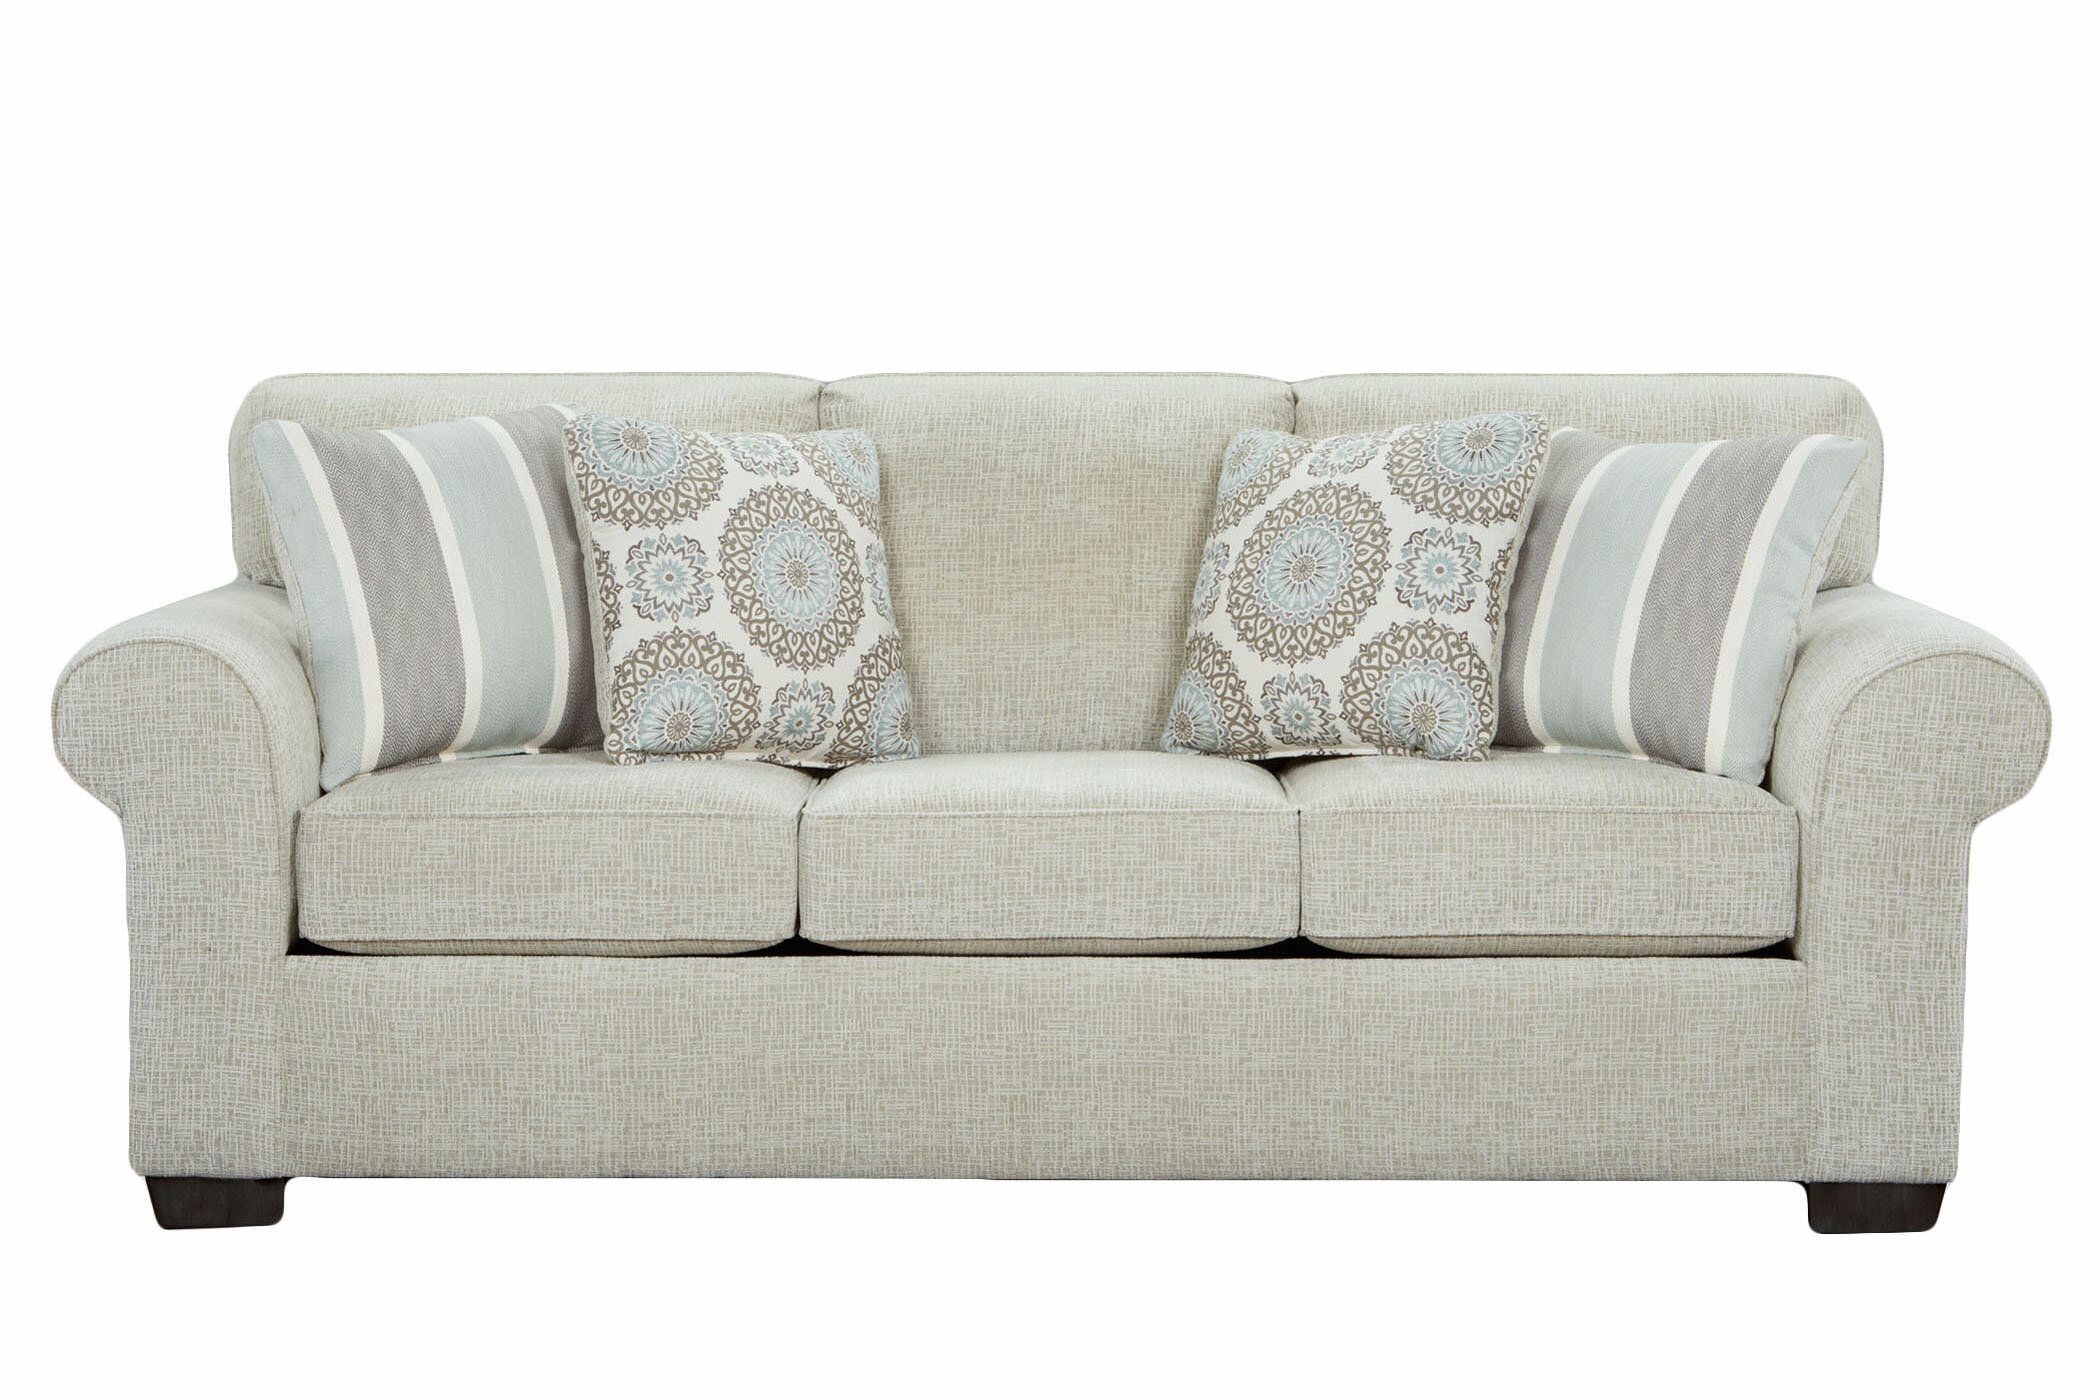 Charlton Home® Lansdale 88'' Upholstered Sofa & Reviews | Wayfair Intended For Sofas With Curved Arms (View 10 of 15)